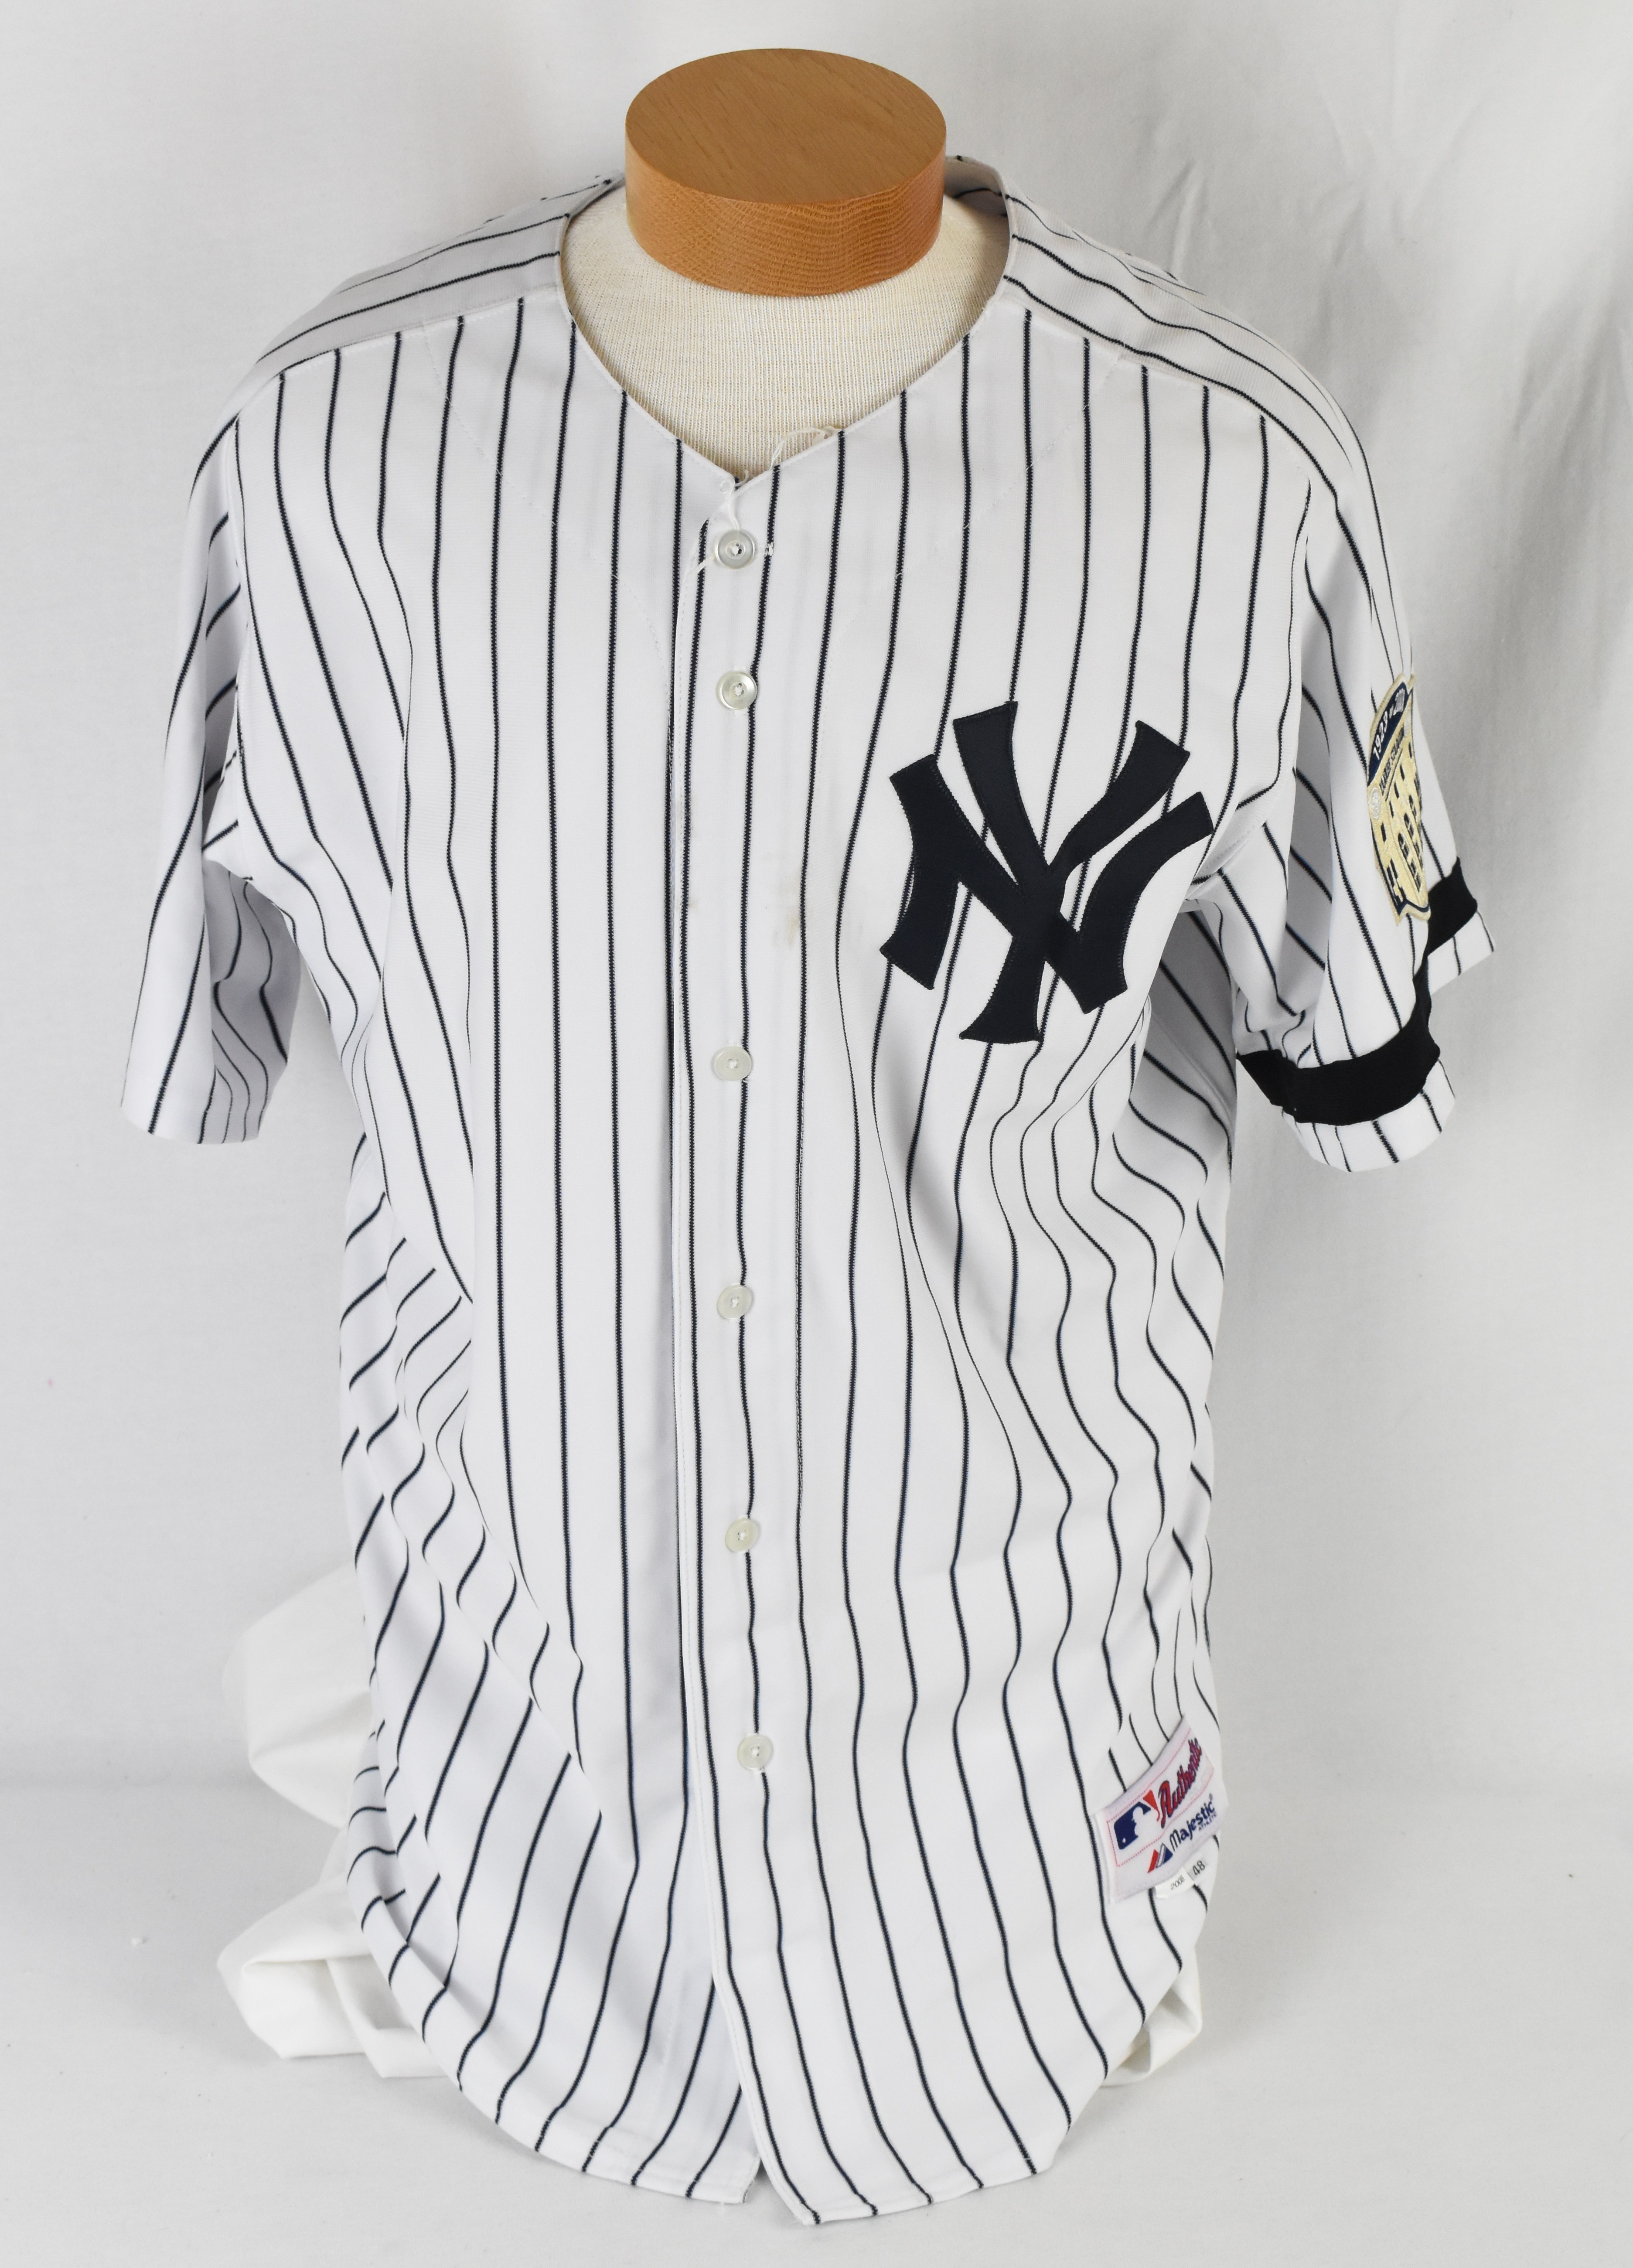 Lot Detail - Mike Mussina 2008 New York Yankees Game Used Jersey